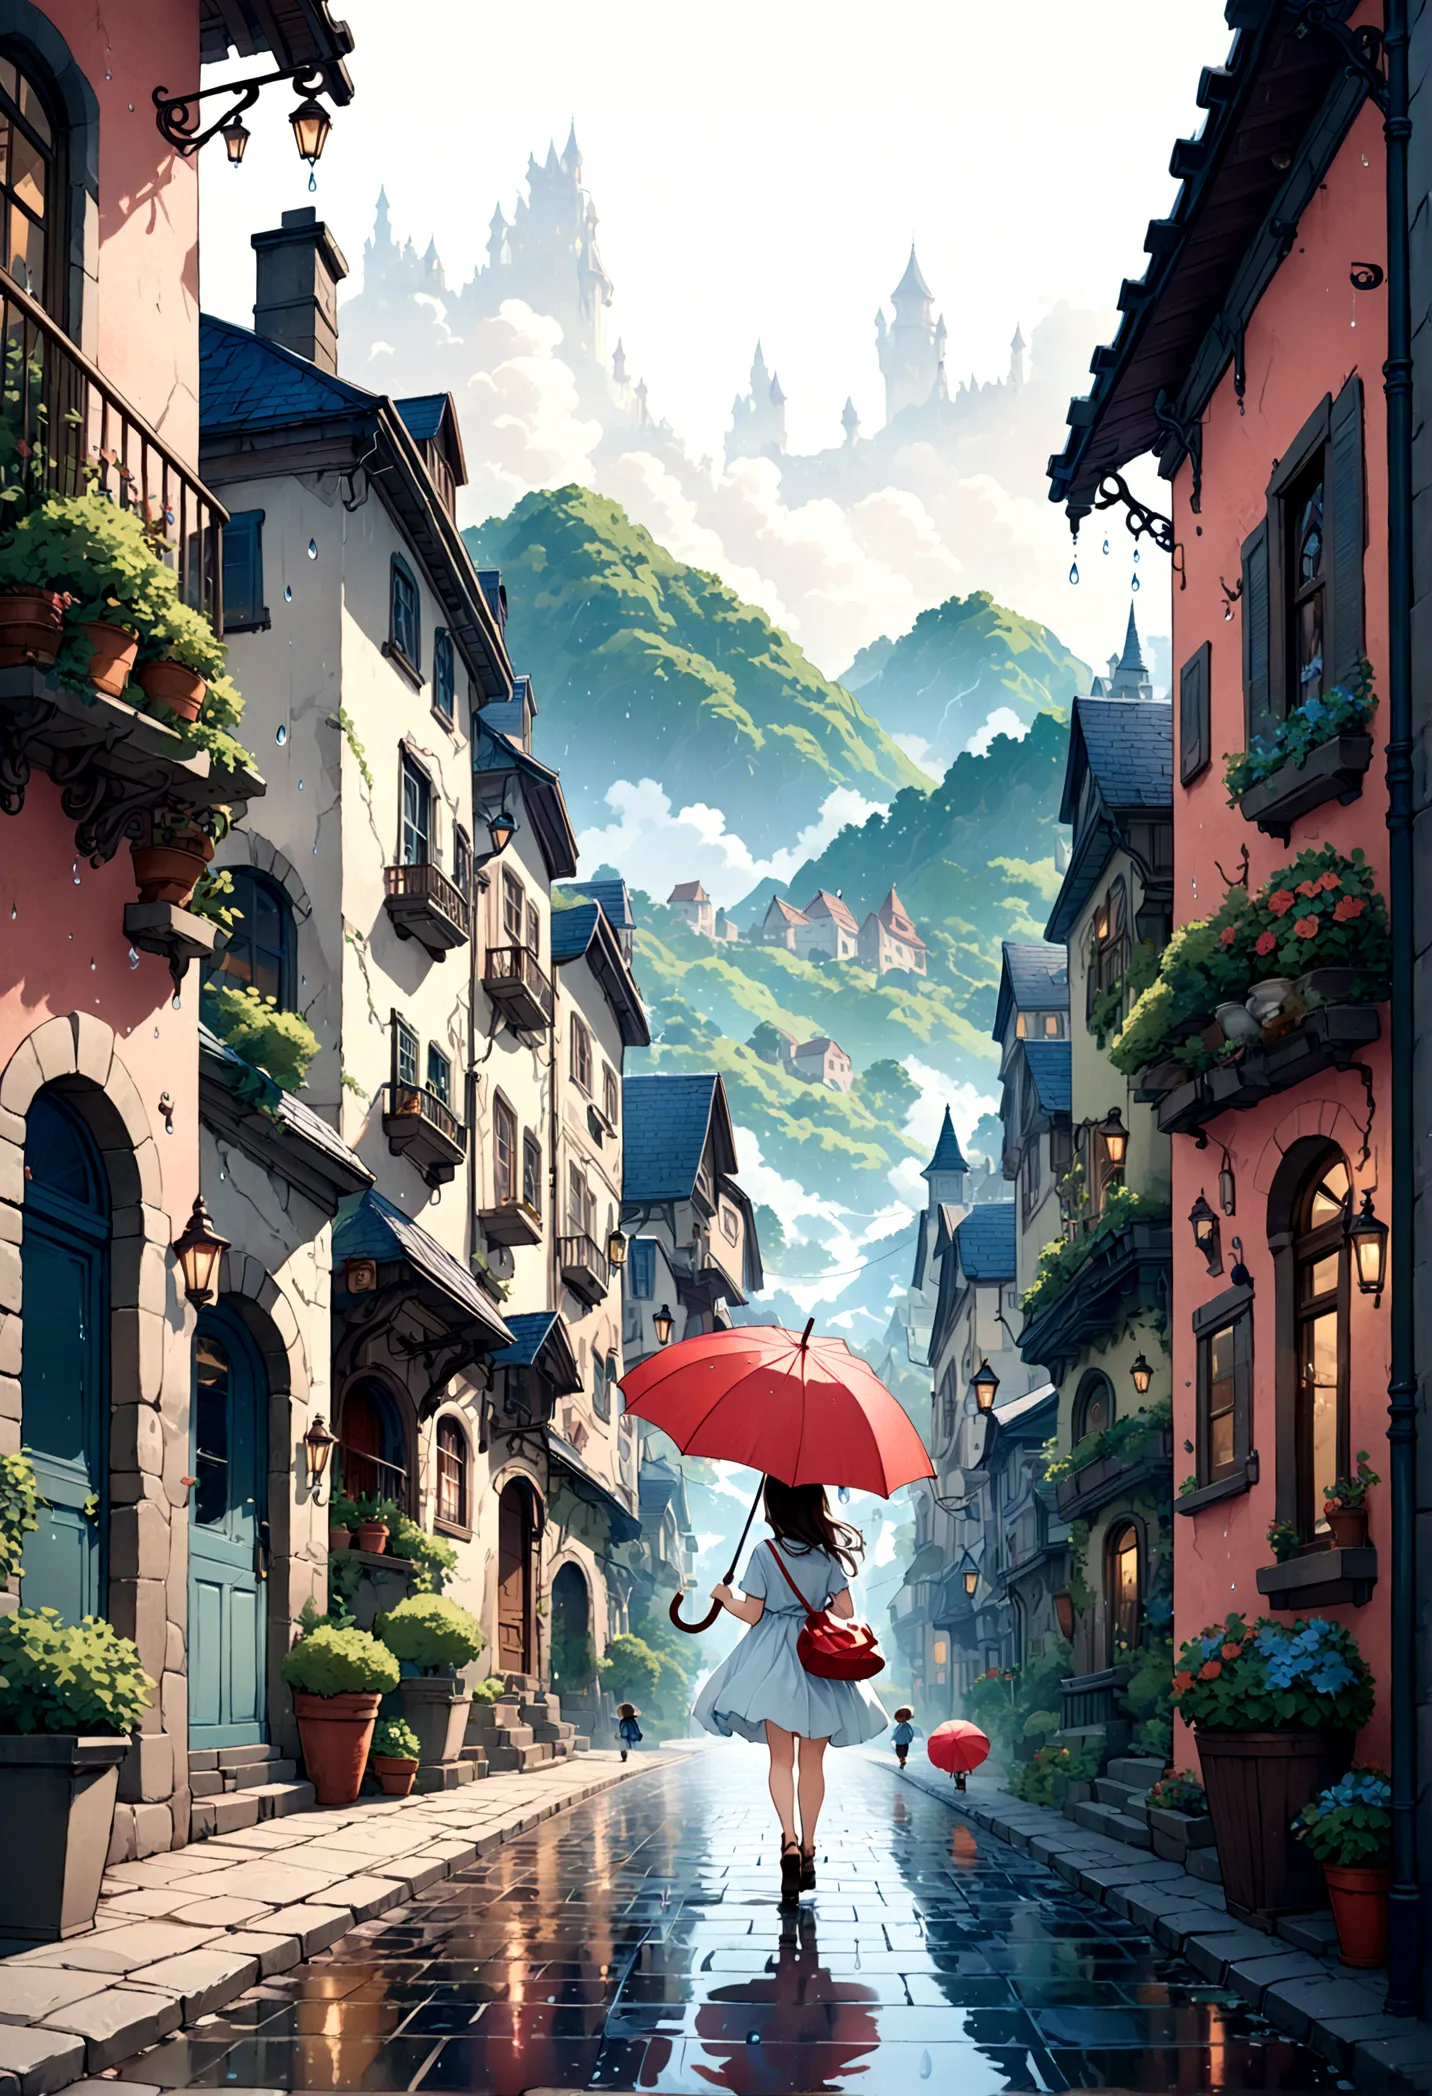 Cute illustration: Landscape,Street corner on a rainy day,A landscape that looks like an illustration from a picture book,Rich i...